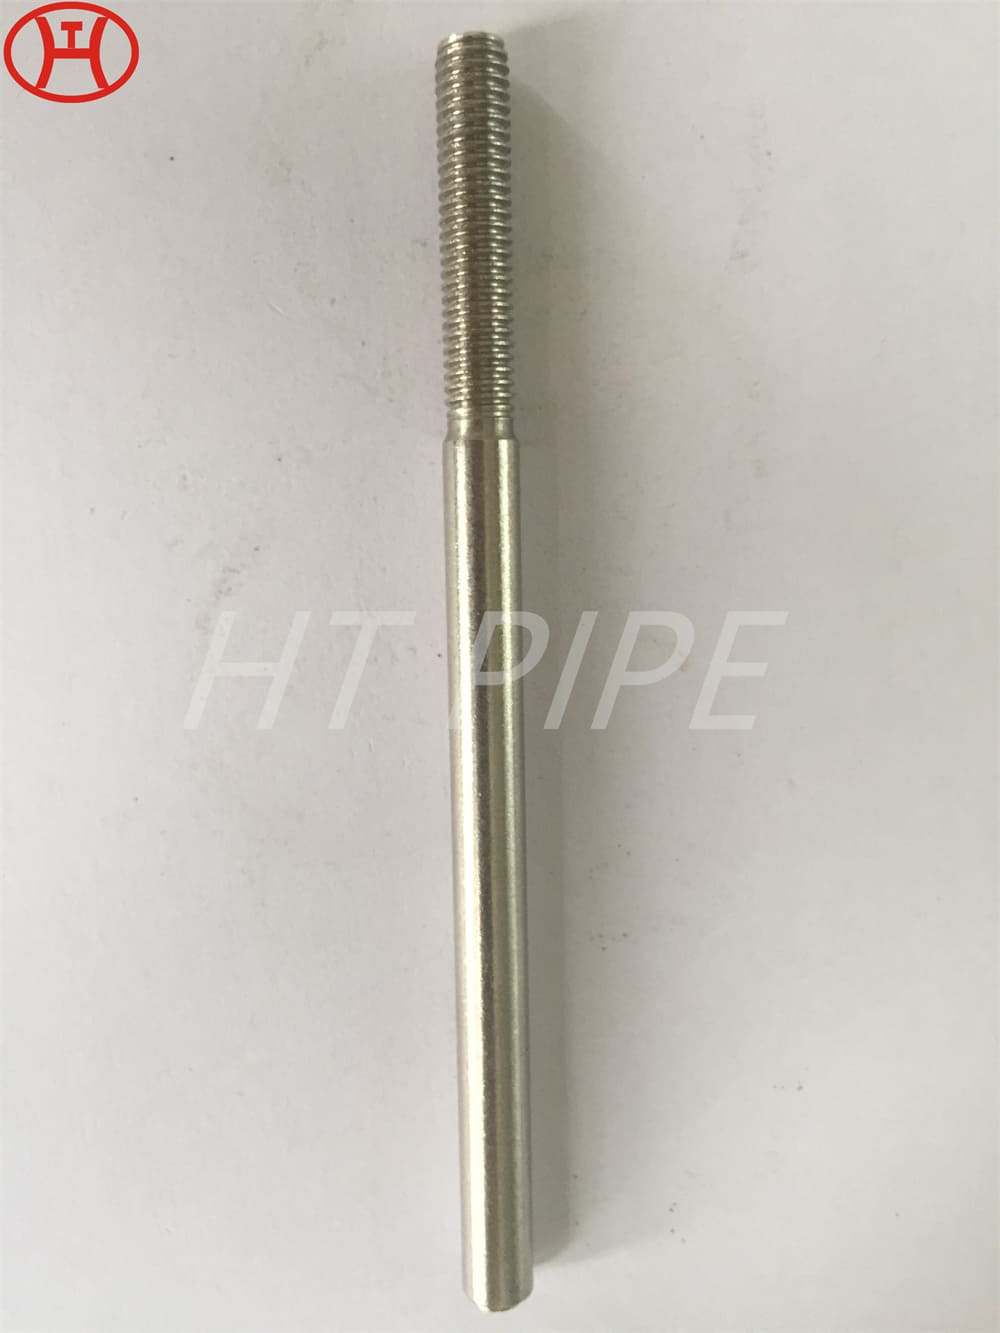 special stainless steel Alloy 926 Inconel 926 1.4529 stud bolt full thread DIN975 DIN976